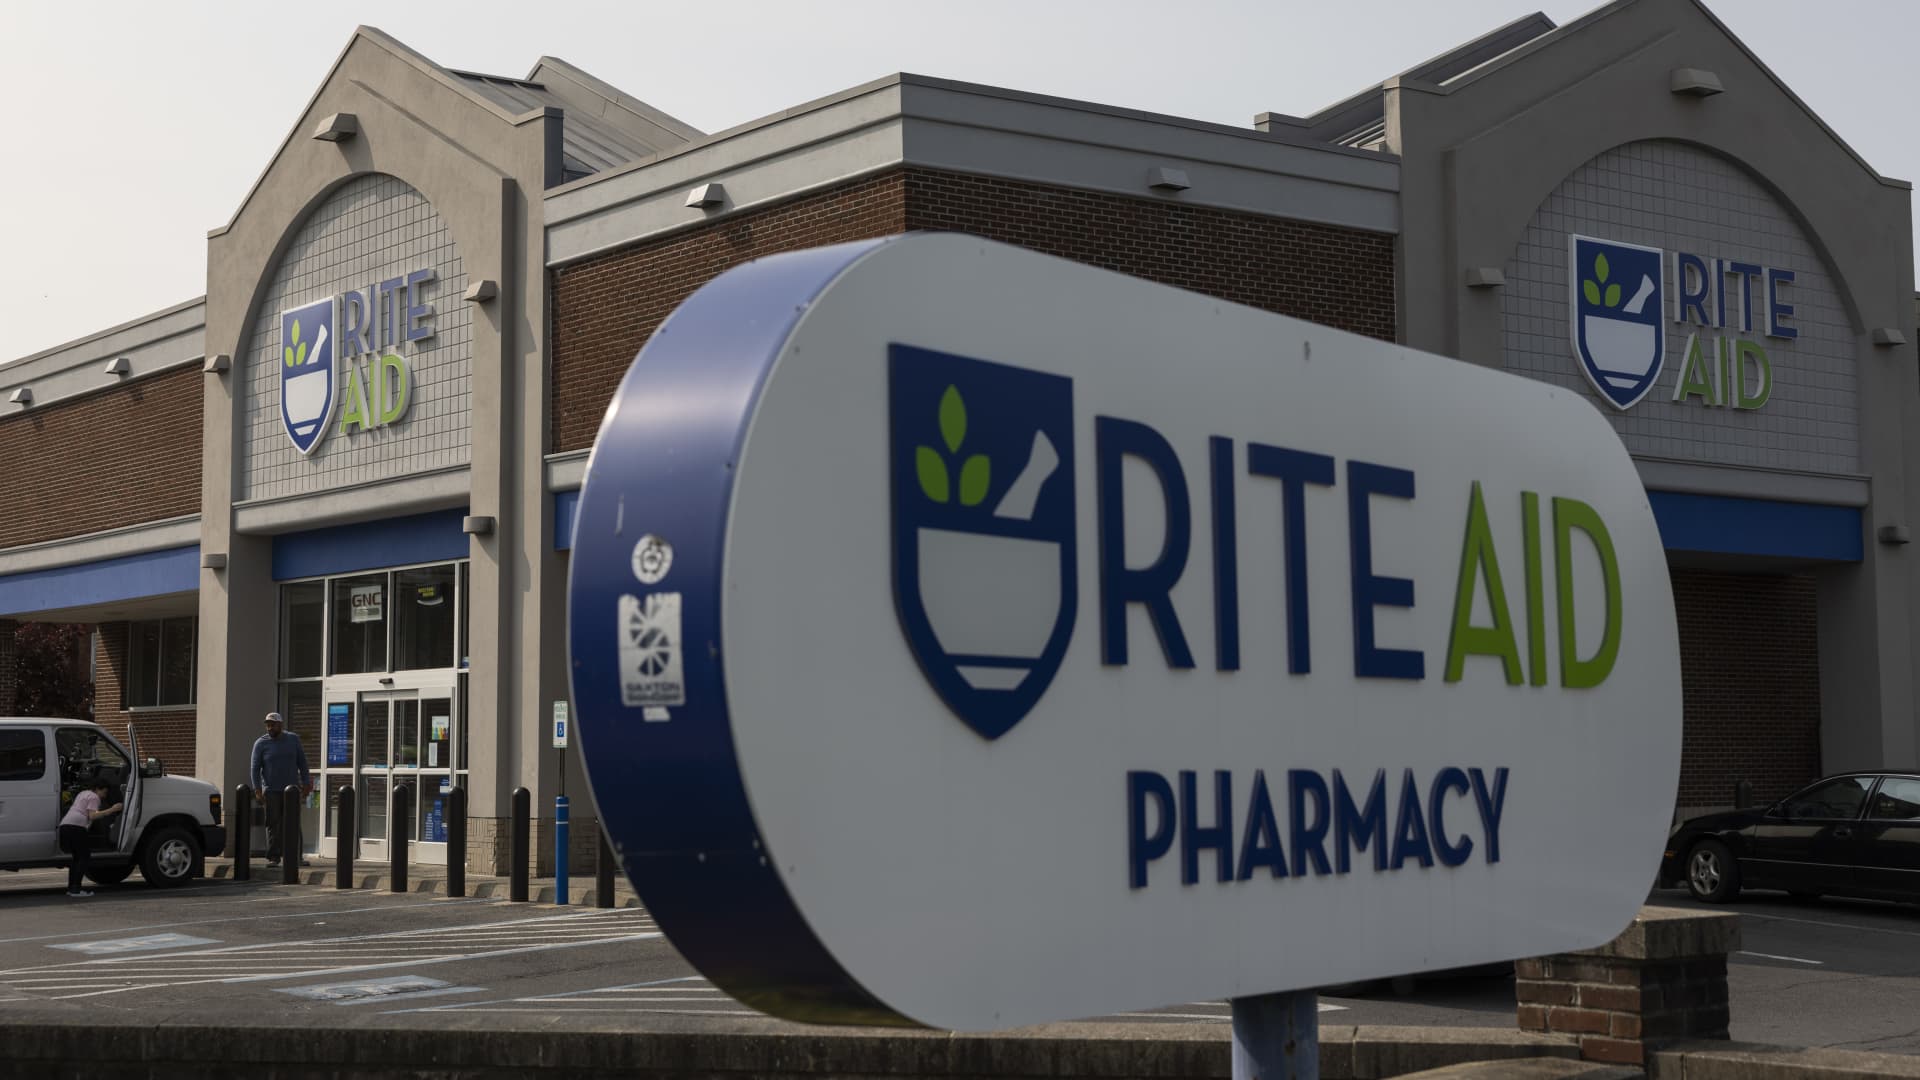 Rite Aid lost more than $1 billion before bankruptcy filing